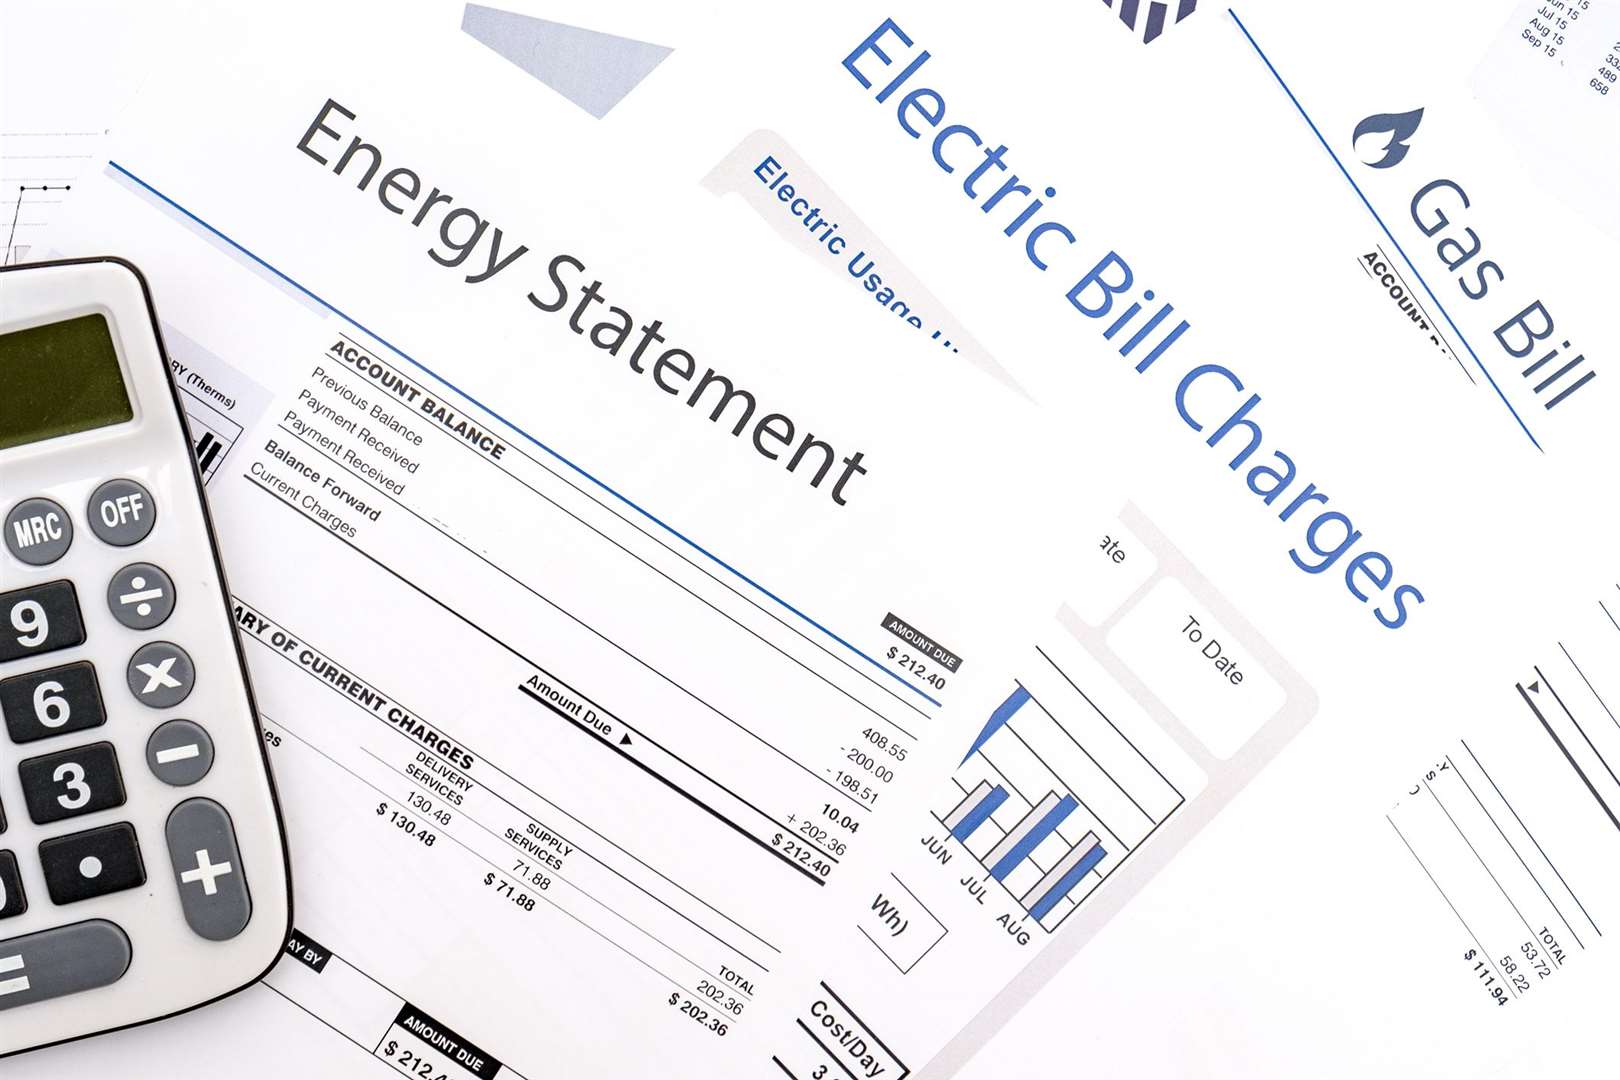 Energy bills will fall in April and possibly again in July suggest predictions by energy experts. Image: Stock photo.